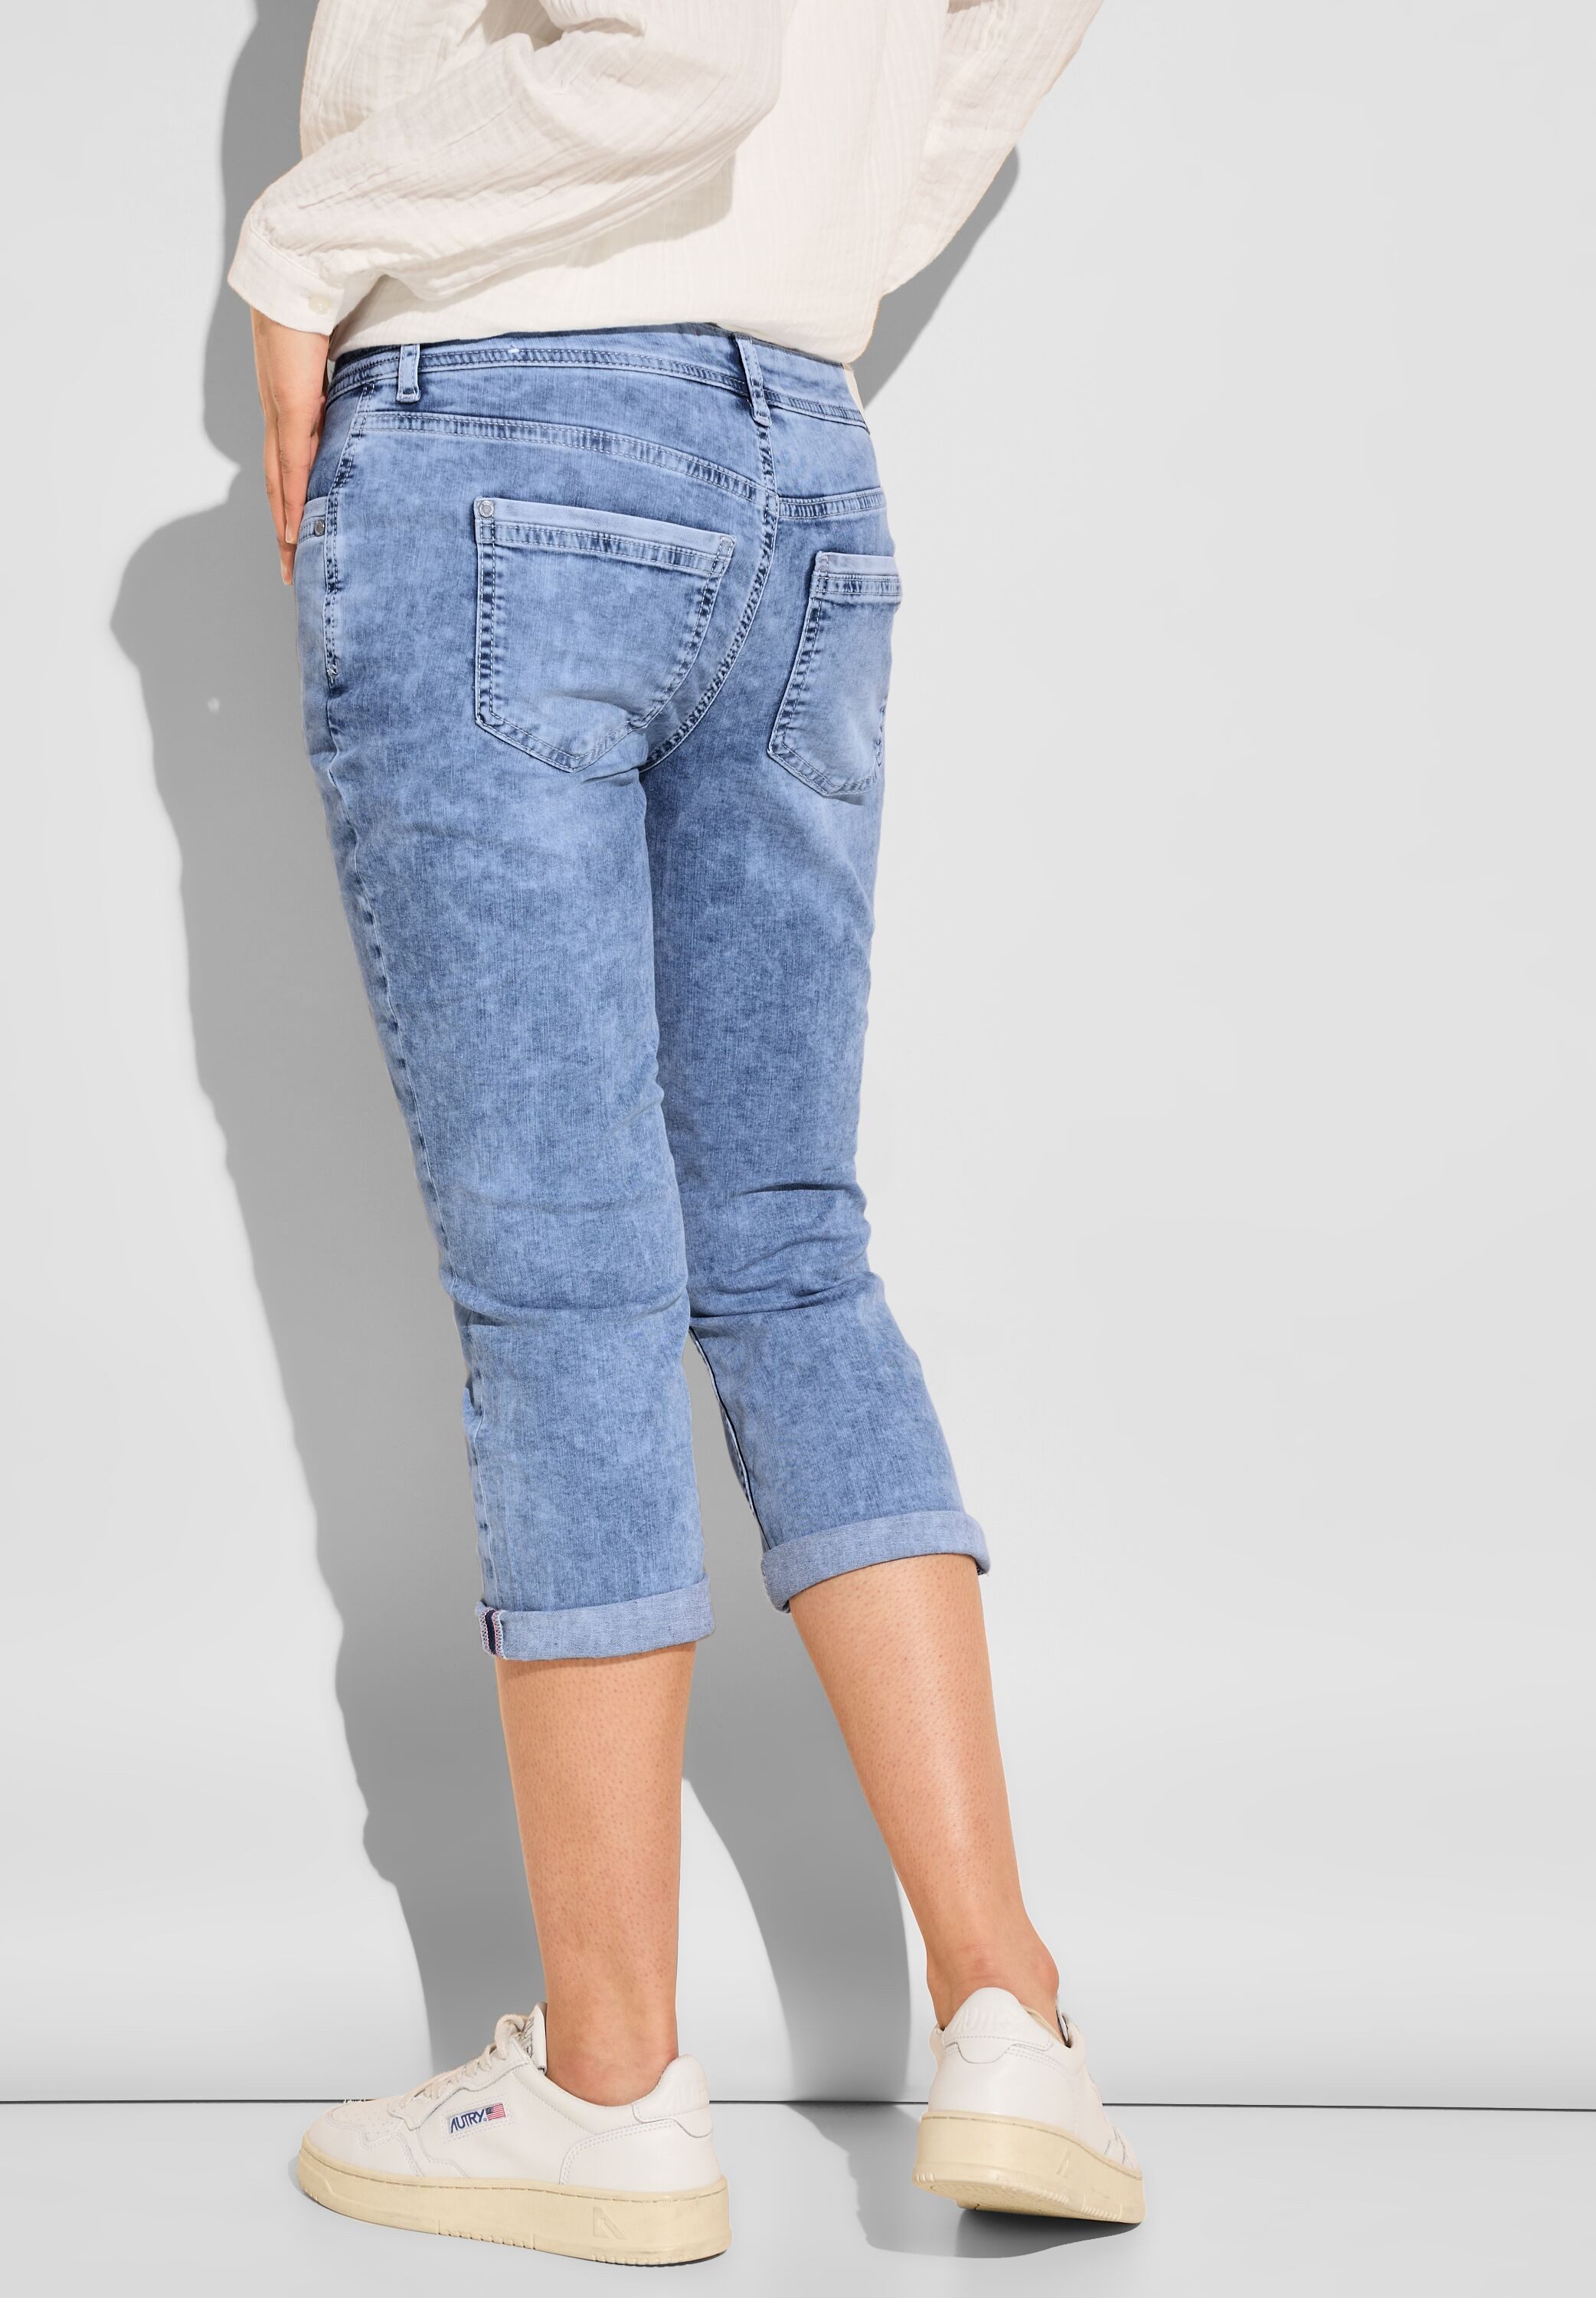 STREET ONE 3 4 jeans